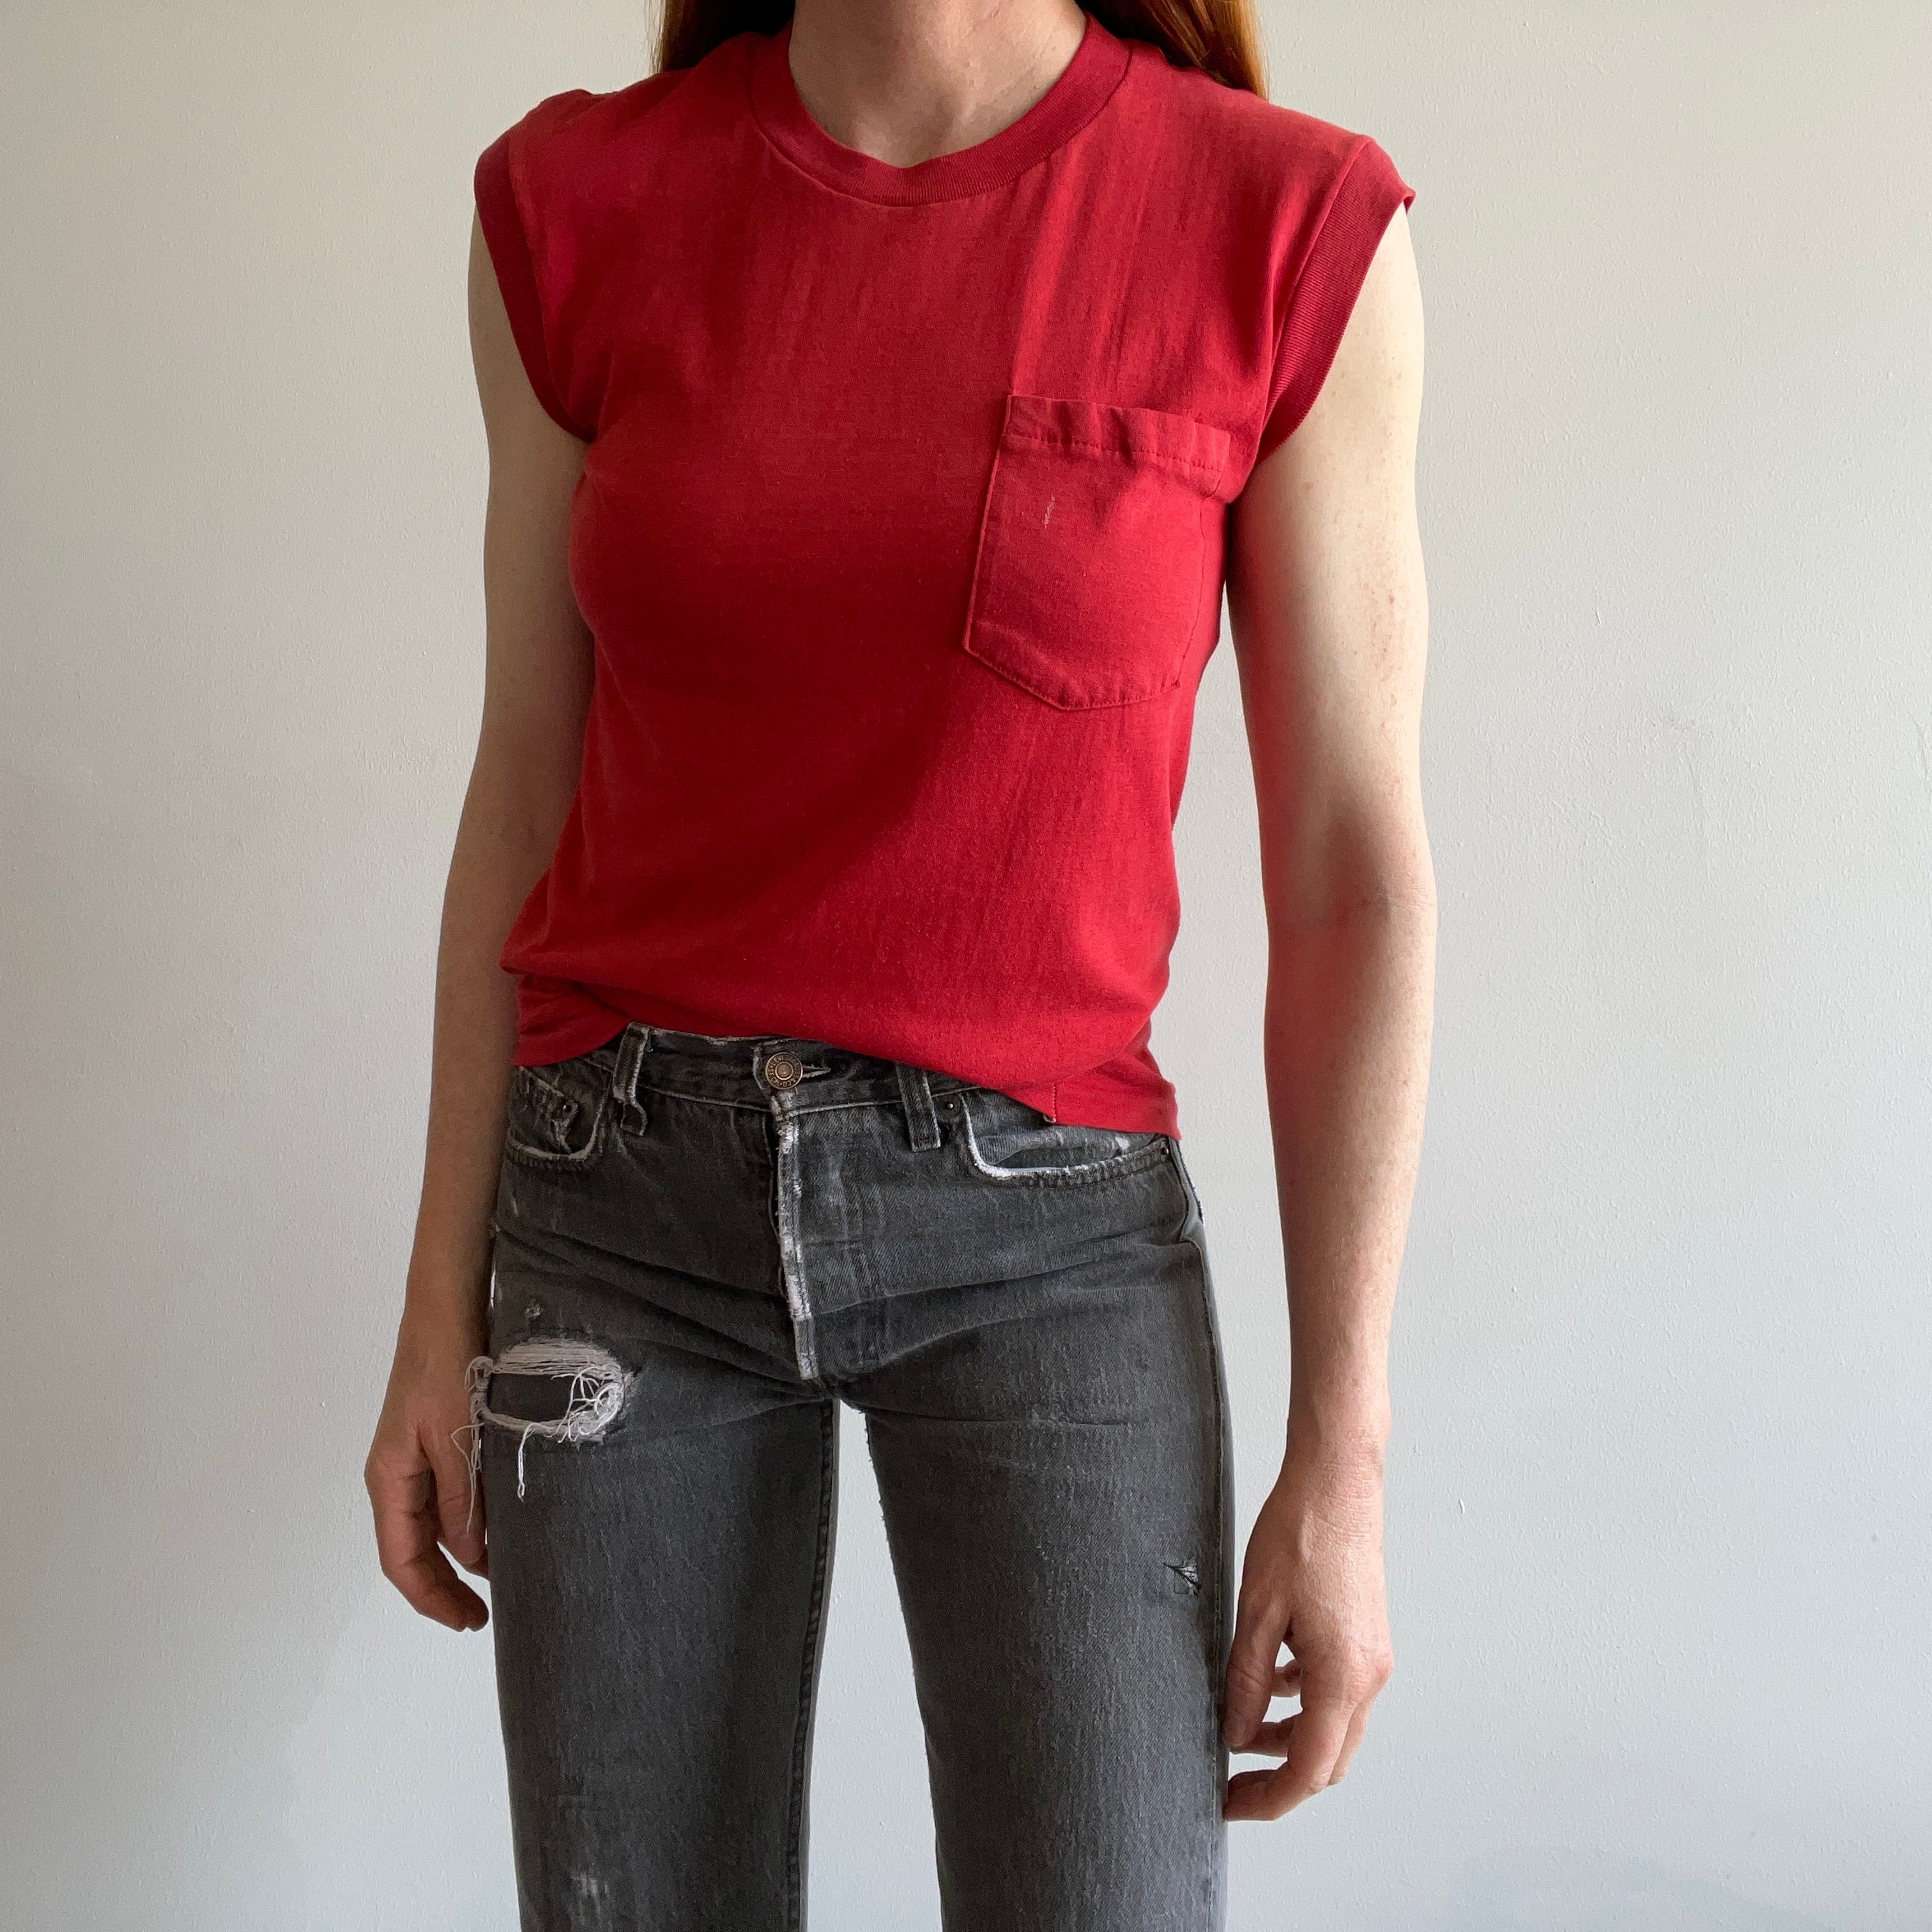 1970s Blank Red Pocket Muscle Tank